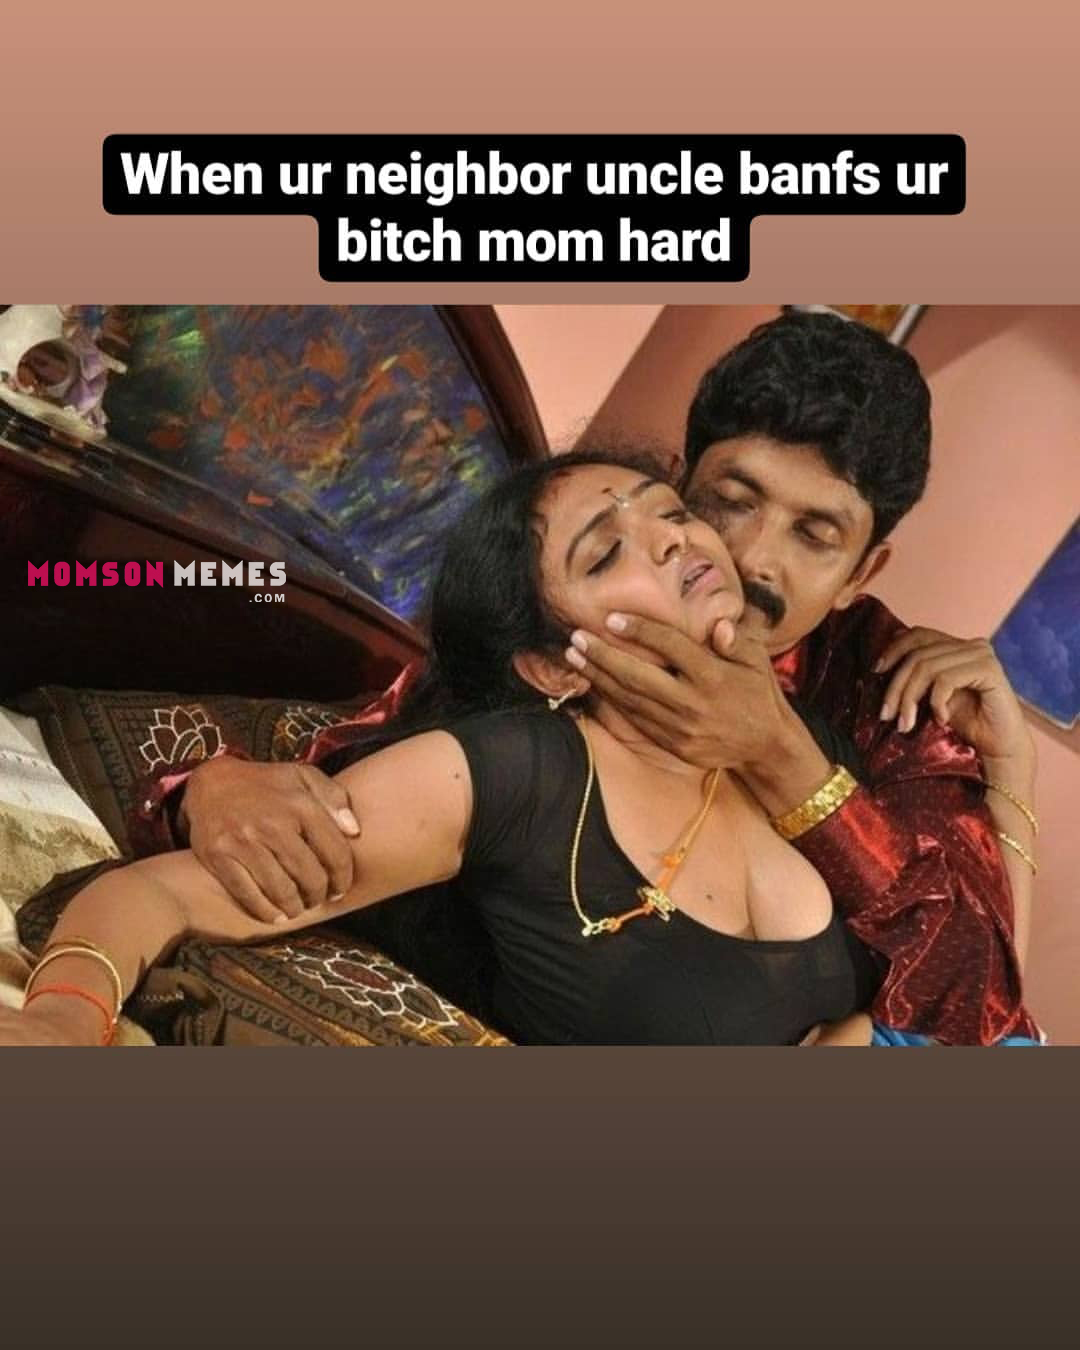 Neighbor Porn Captions - When your neighbour uncle bangs your mom! - Incest Mom Son Captions Memes